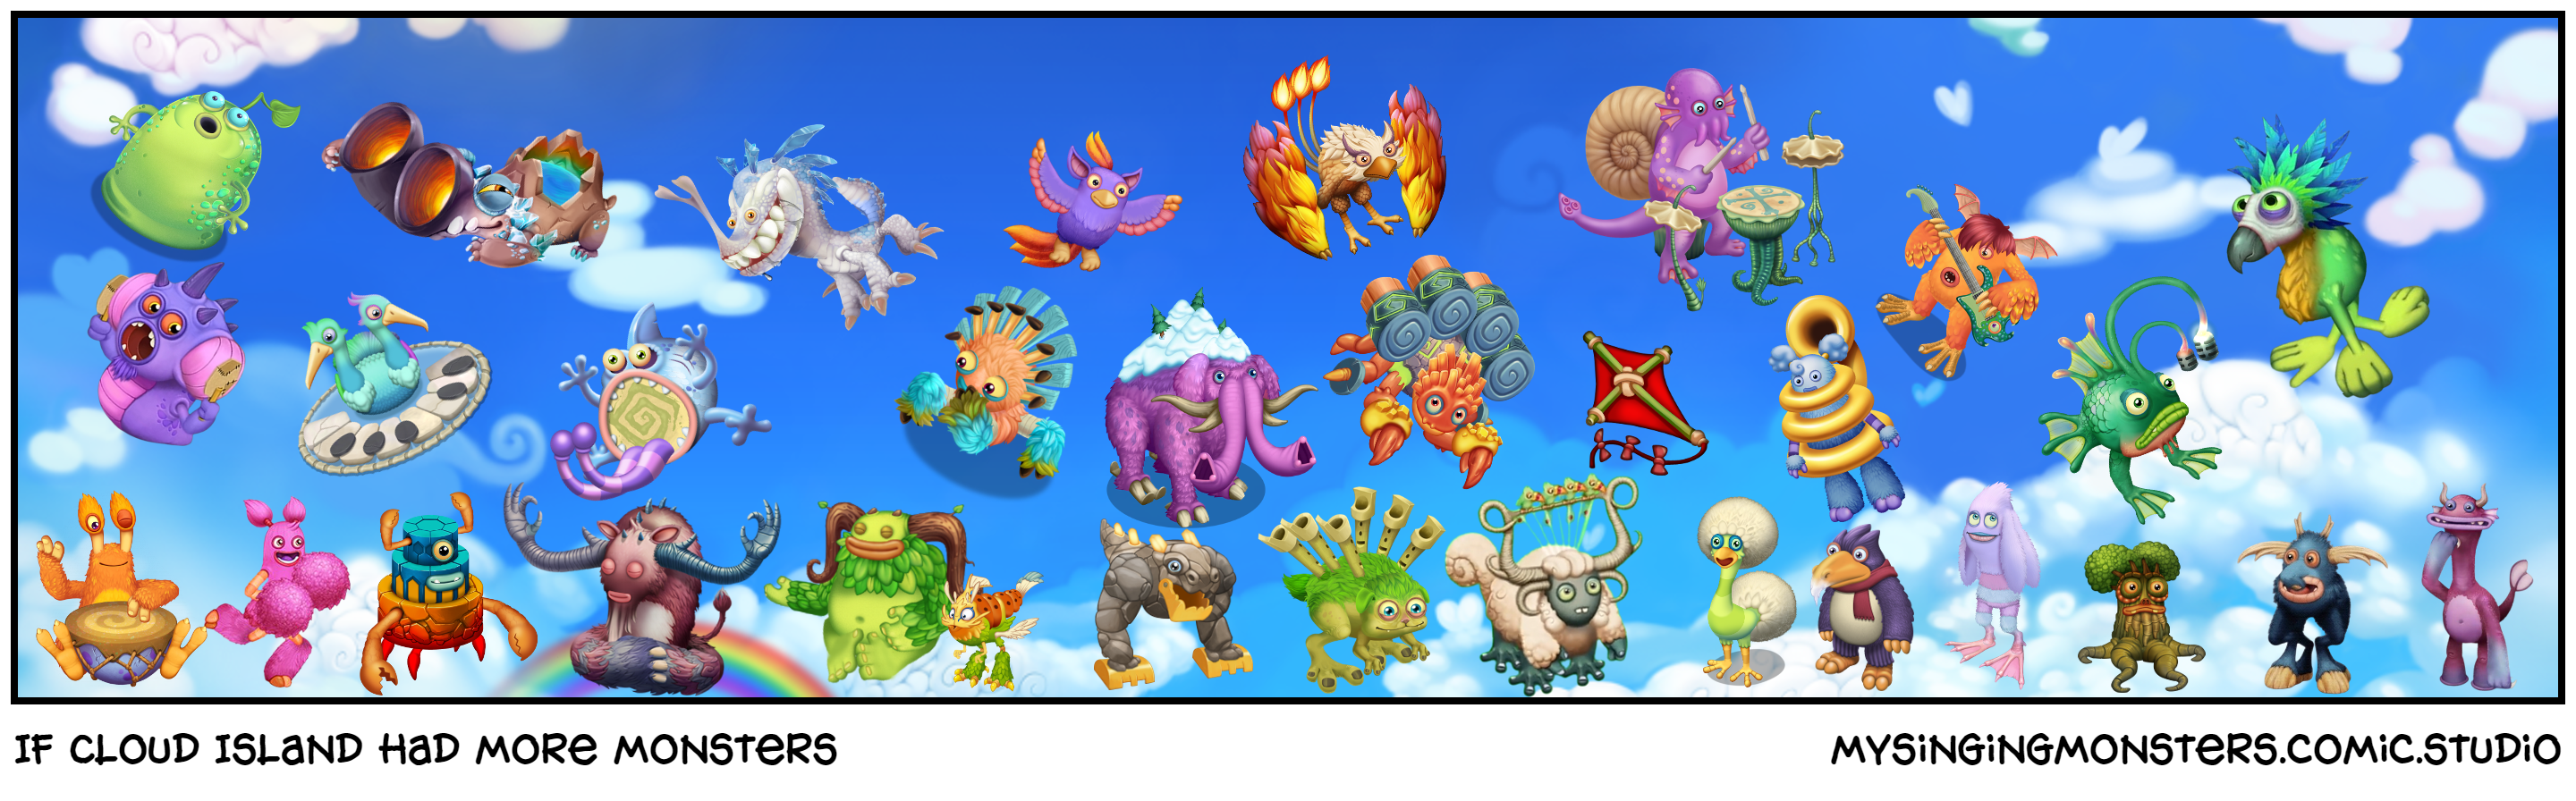 If Cloud Island had more monsters